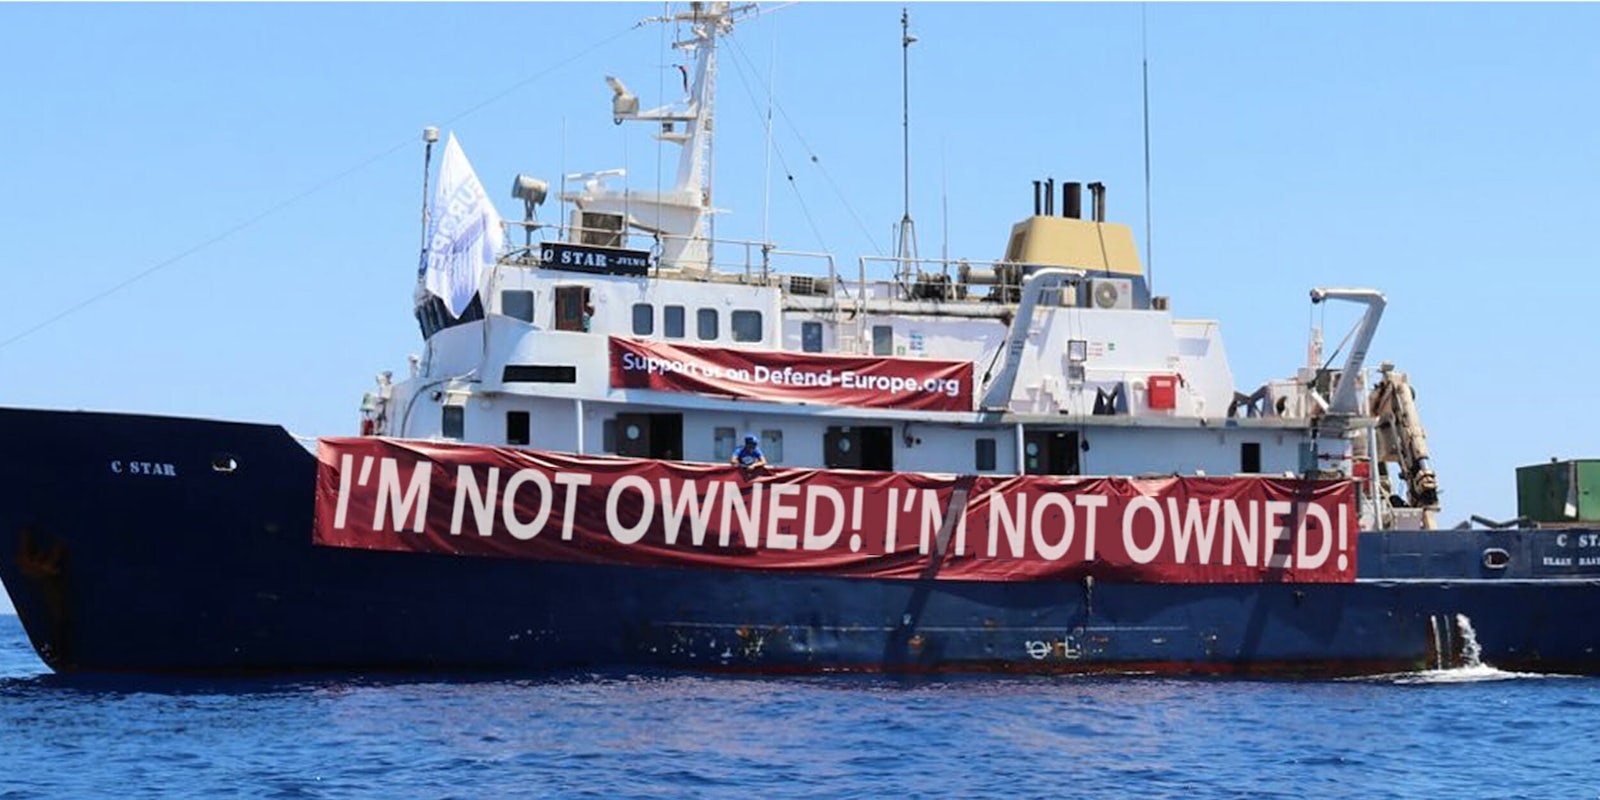 C Star ship with 'I'm not owned! I'm not owned!' banner